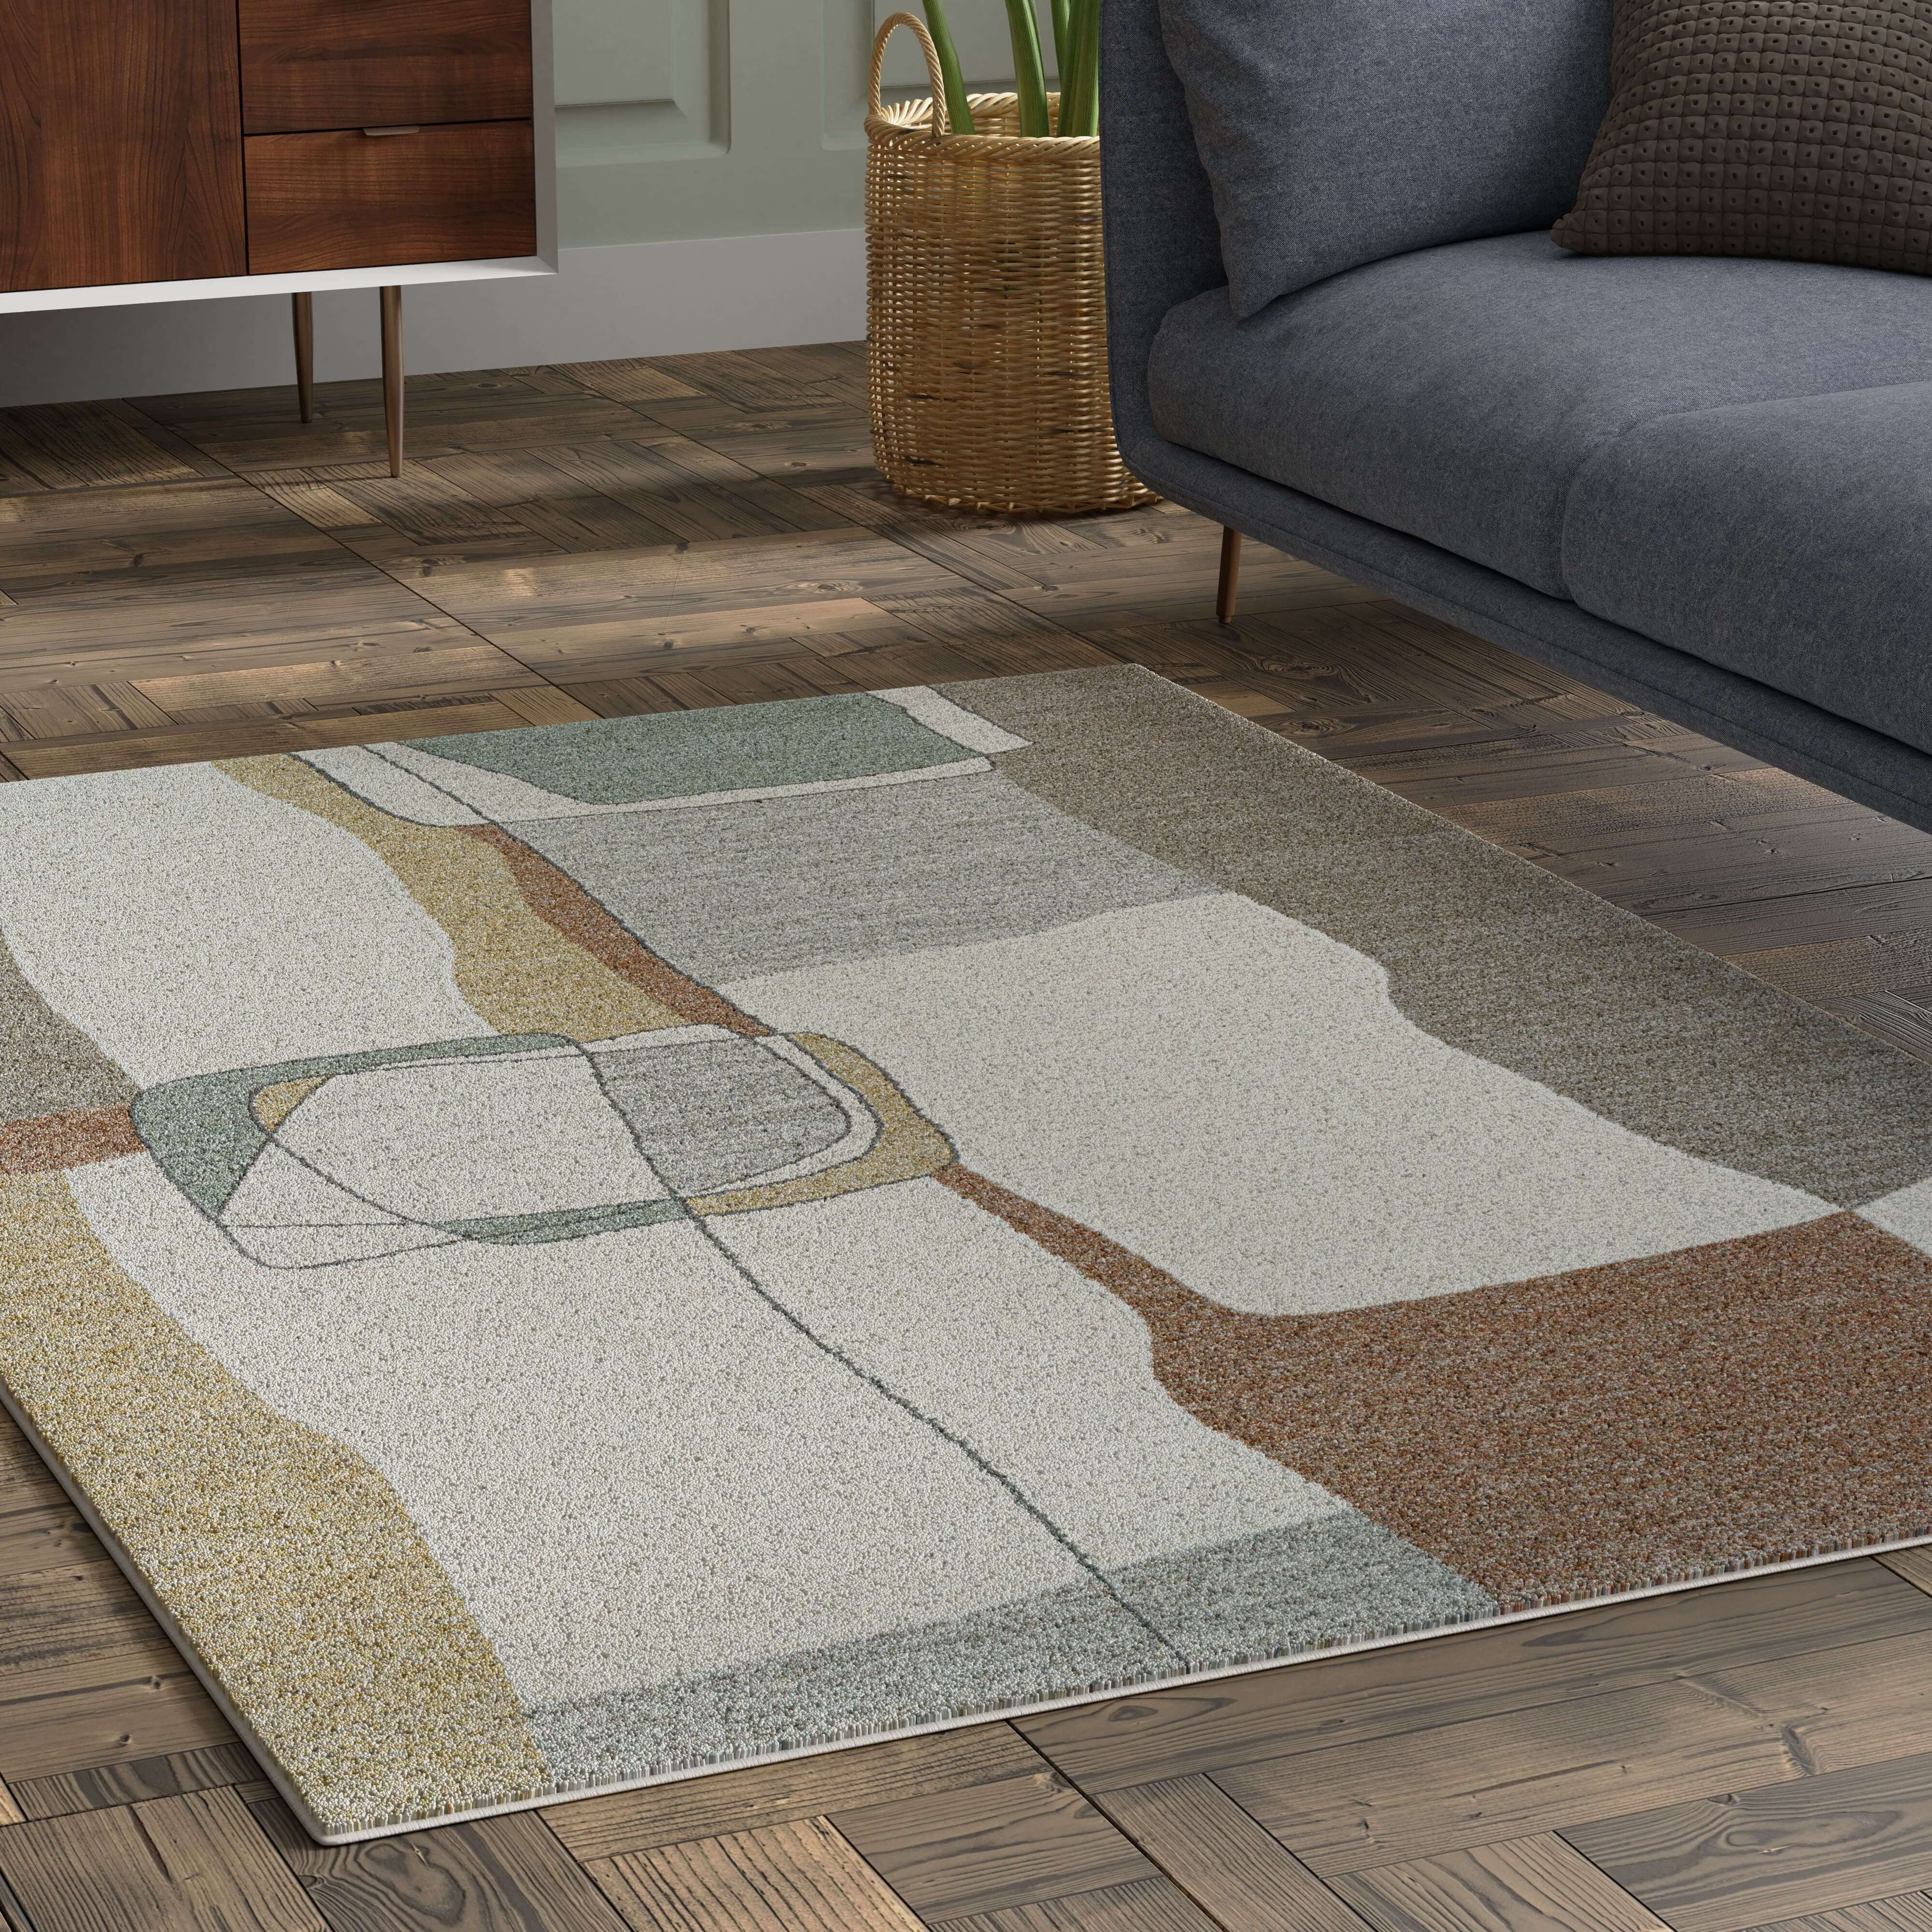 3D detail shot of contemporary rug made in imagine.io